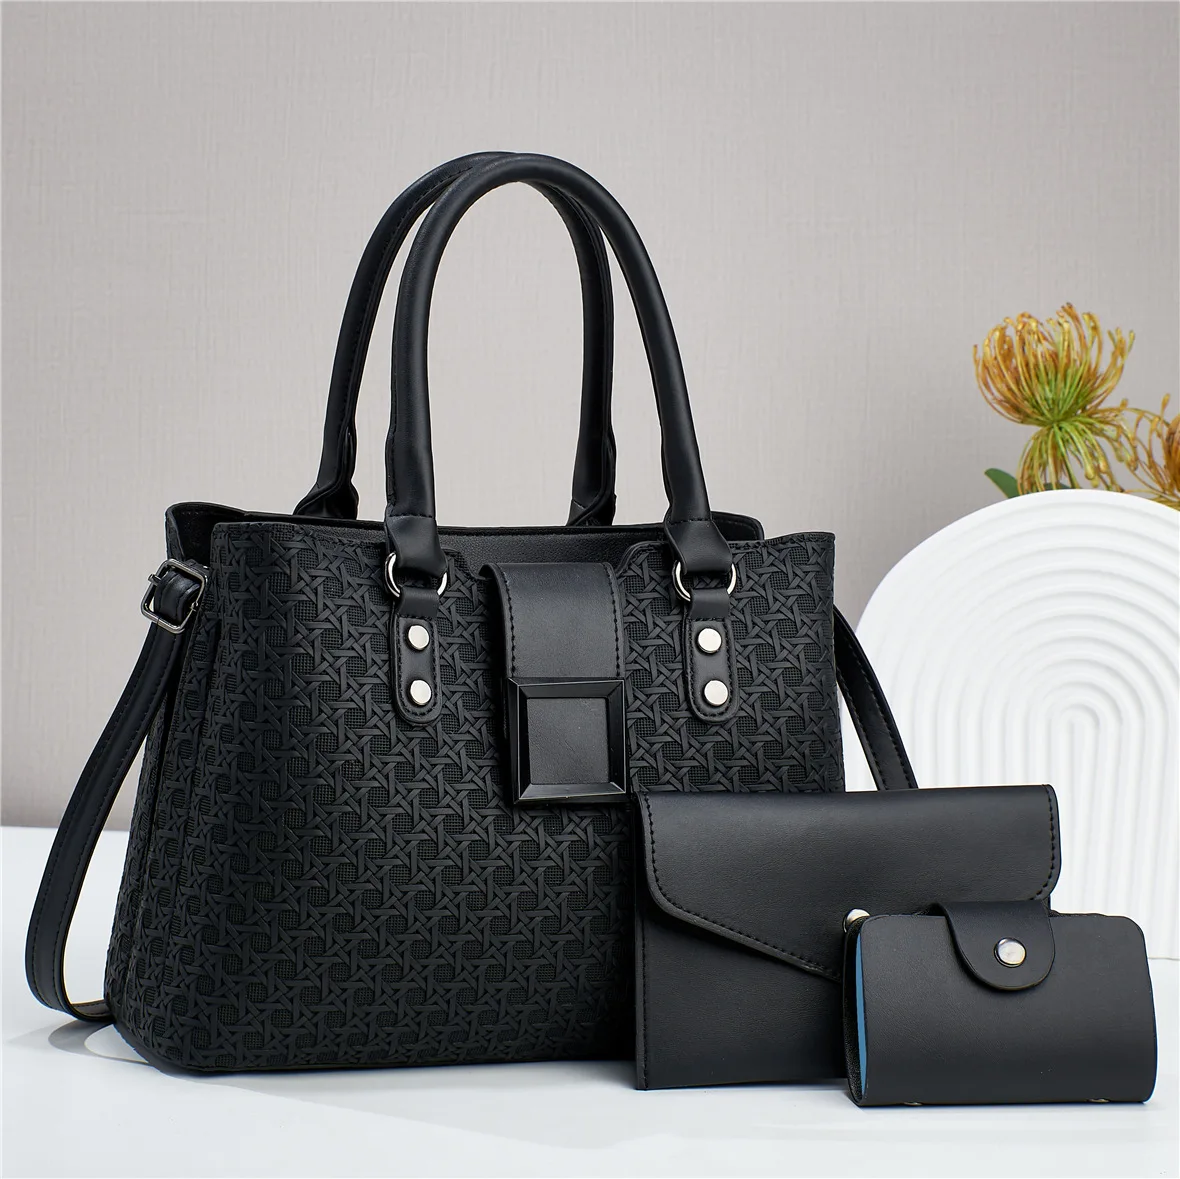 

Fashionable and Spacious Women's Shoulder Bag with High-Quality Texture for Parties and Commuting